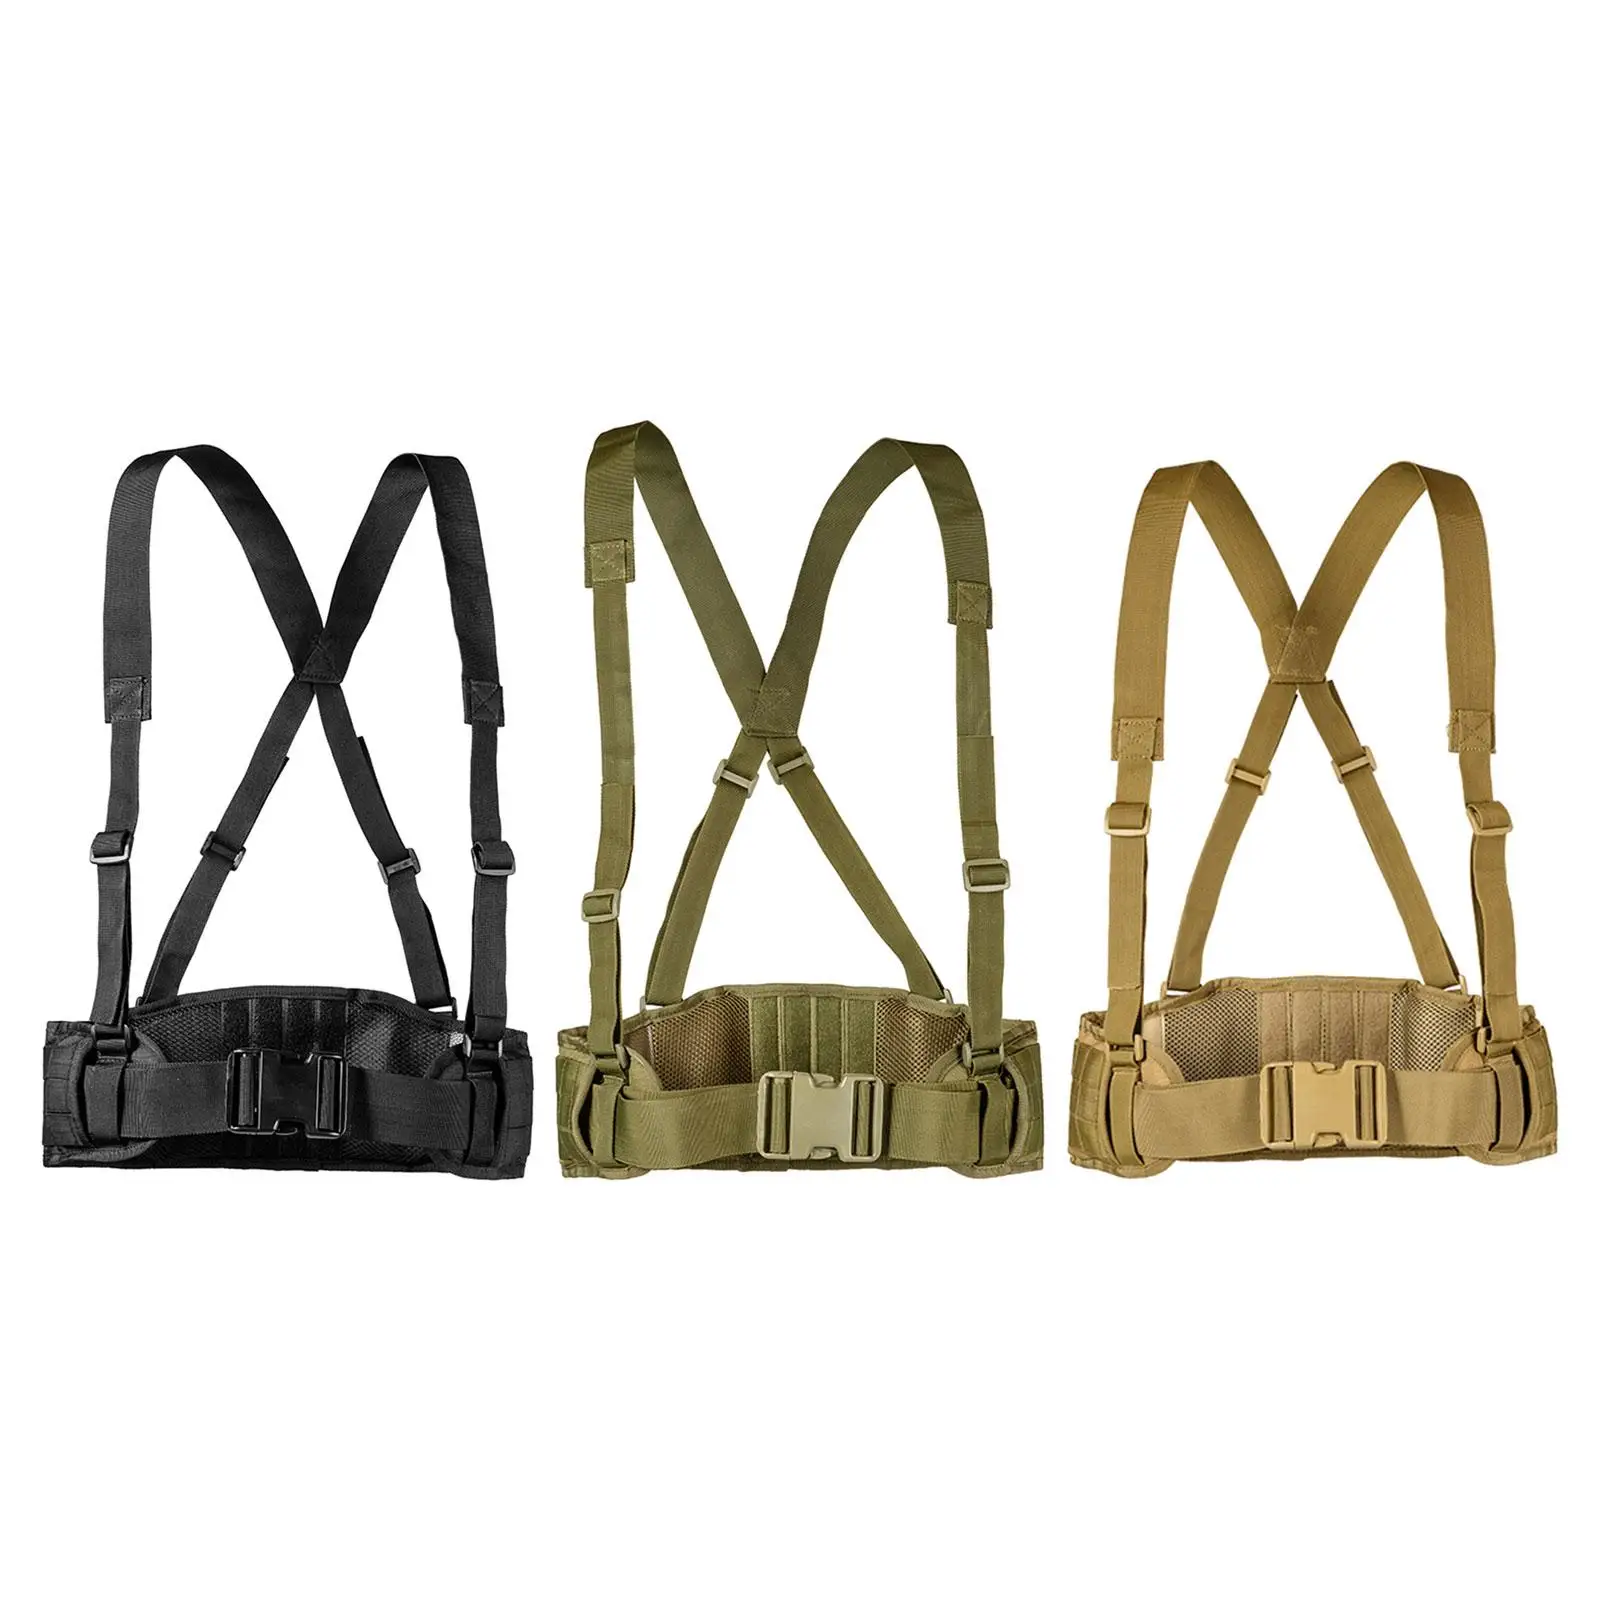 Outdoor Belt Waist Belts Heavy Duty Adjustable Breathable Utility Belt for Hiking Outdoor Sports Hunting Game Equipment